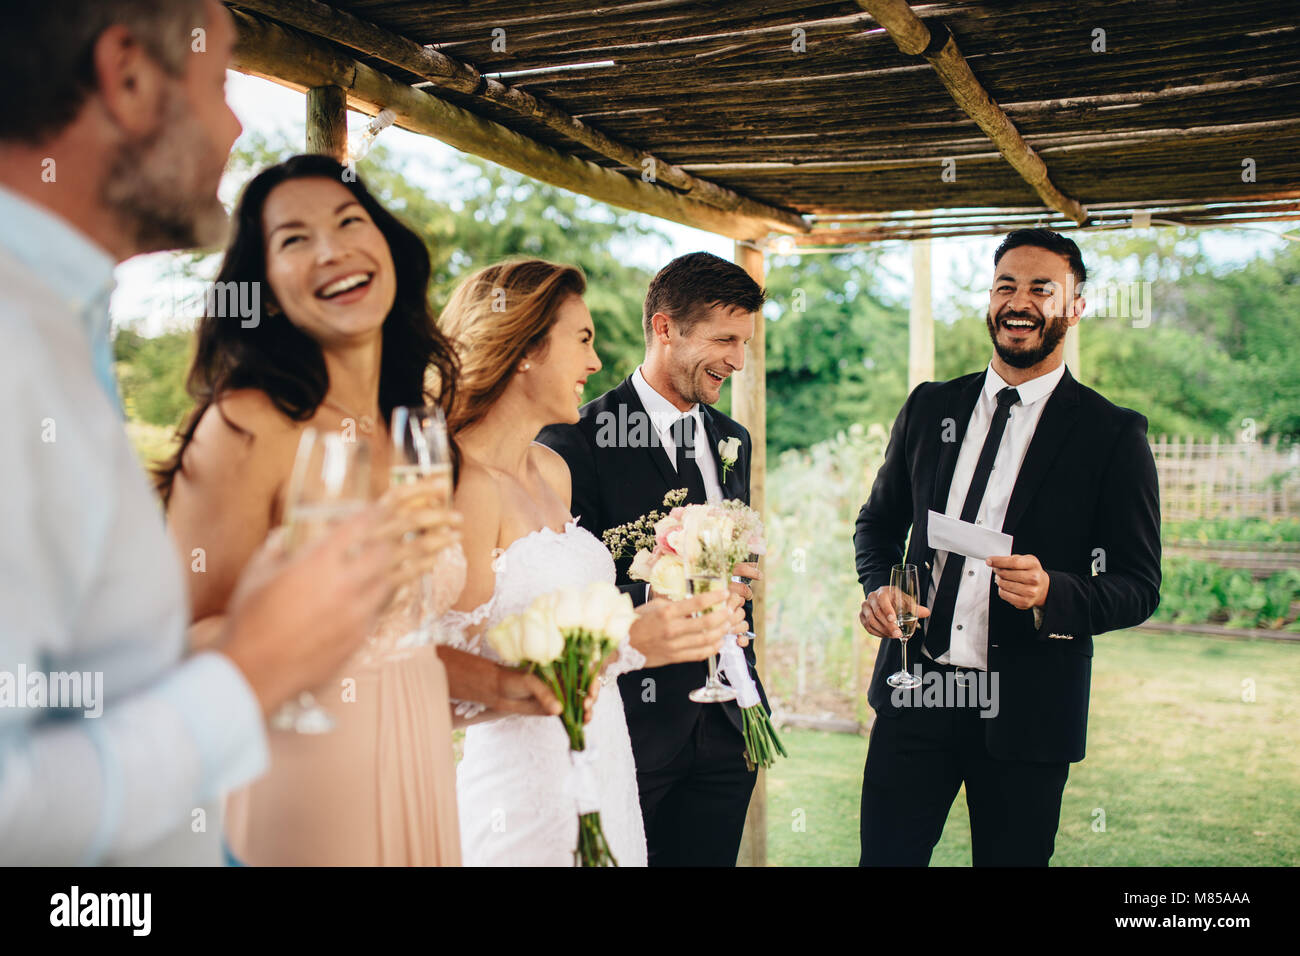 best man giving speech to newlywed couple at wedding reception group M85AAA